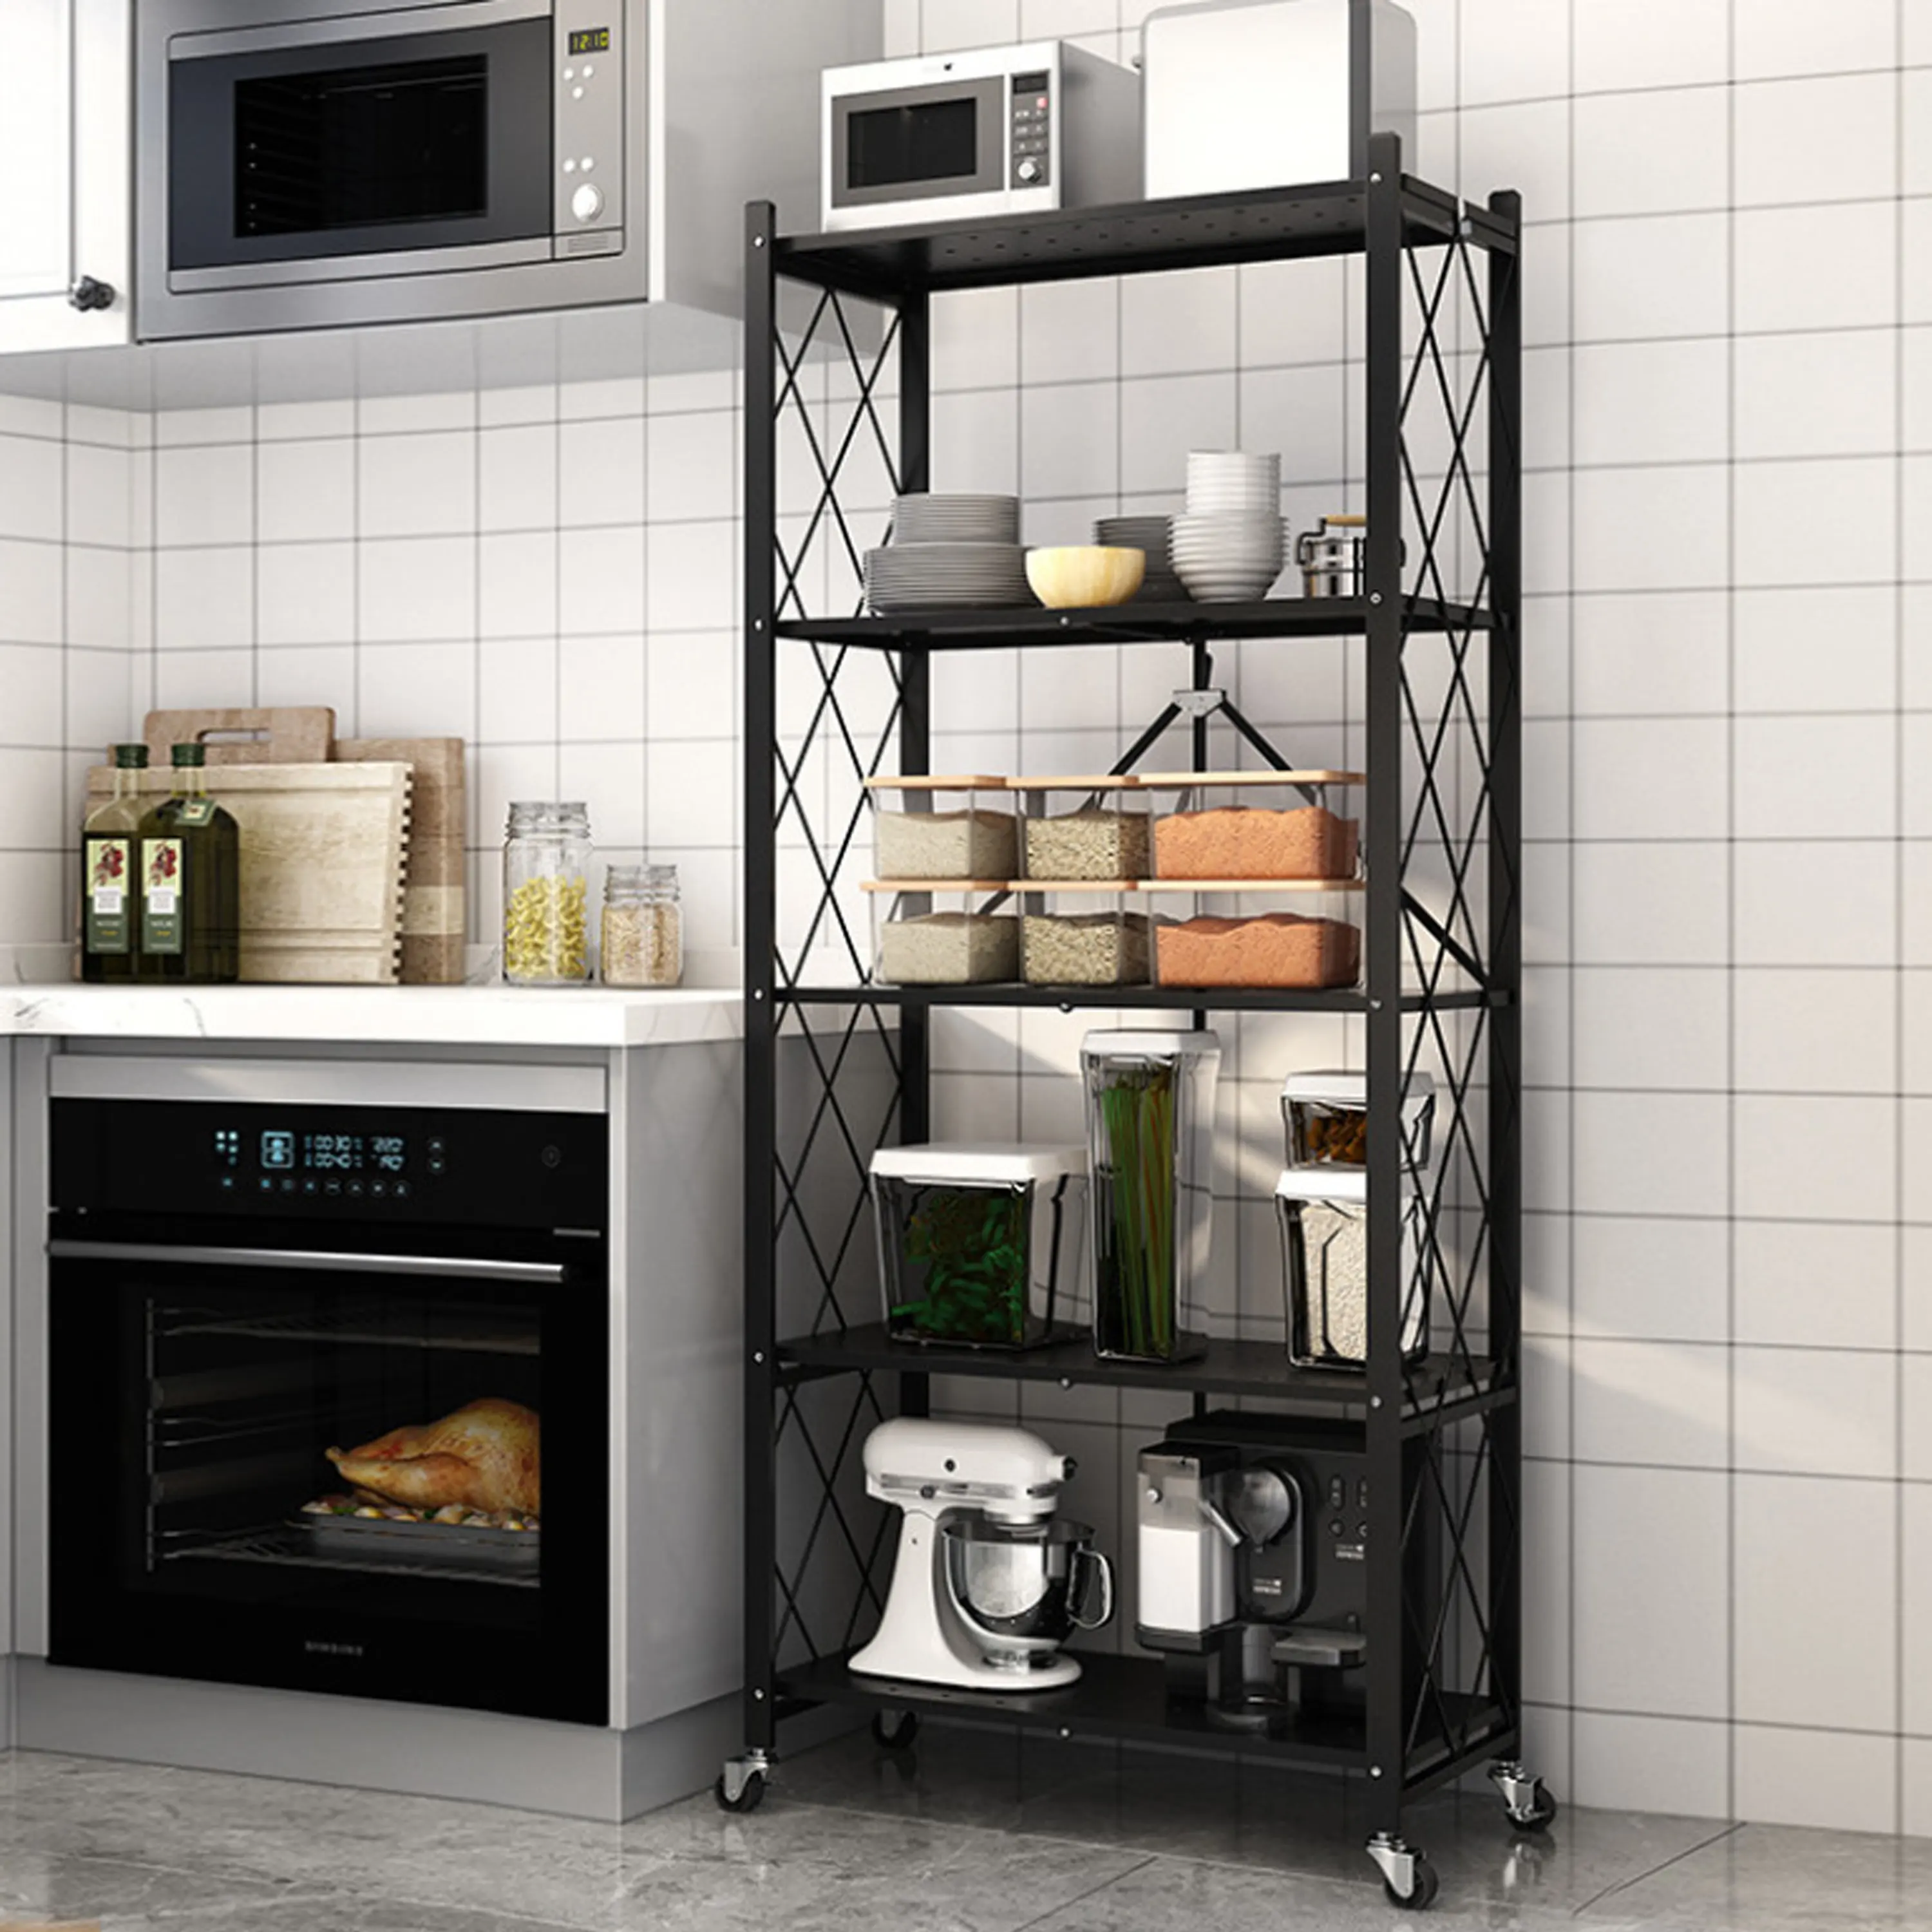 Movable Garage Wire Shelving Units Foldable Storage Shelves Black Kitchen IRON Paper Box No Assemble Required Metal 8000g